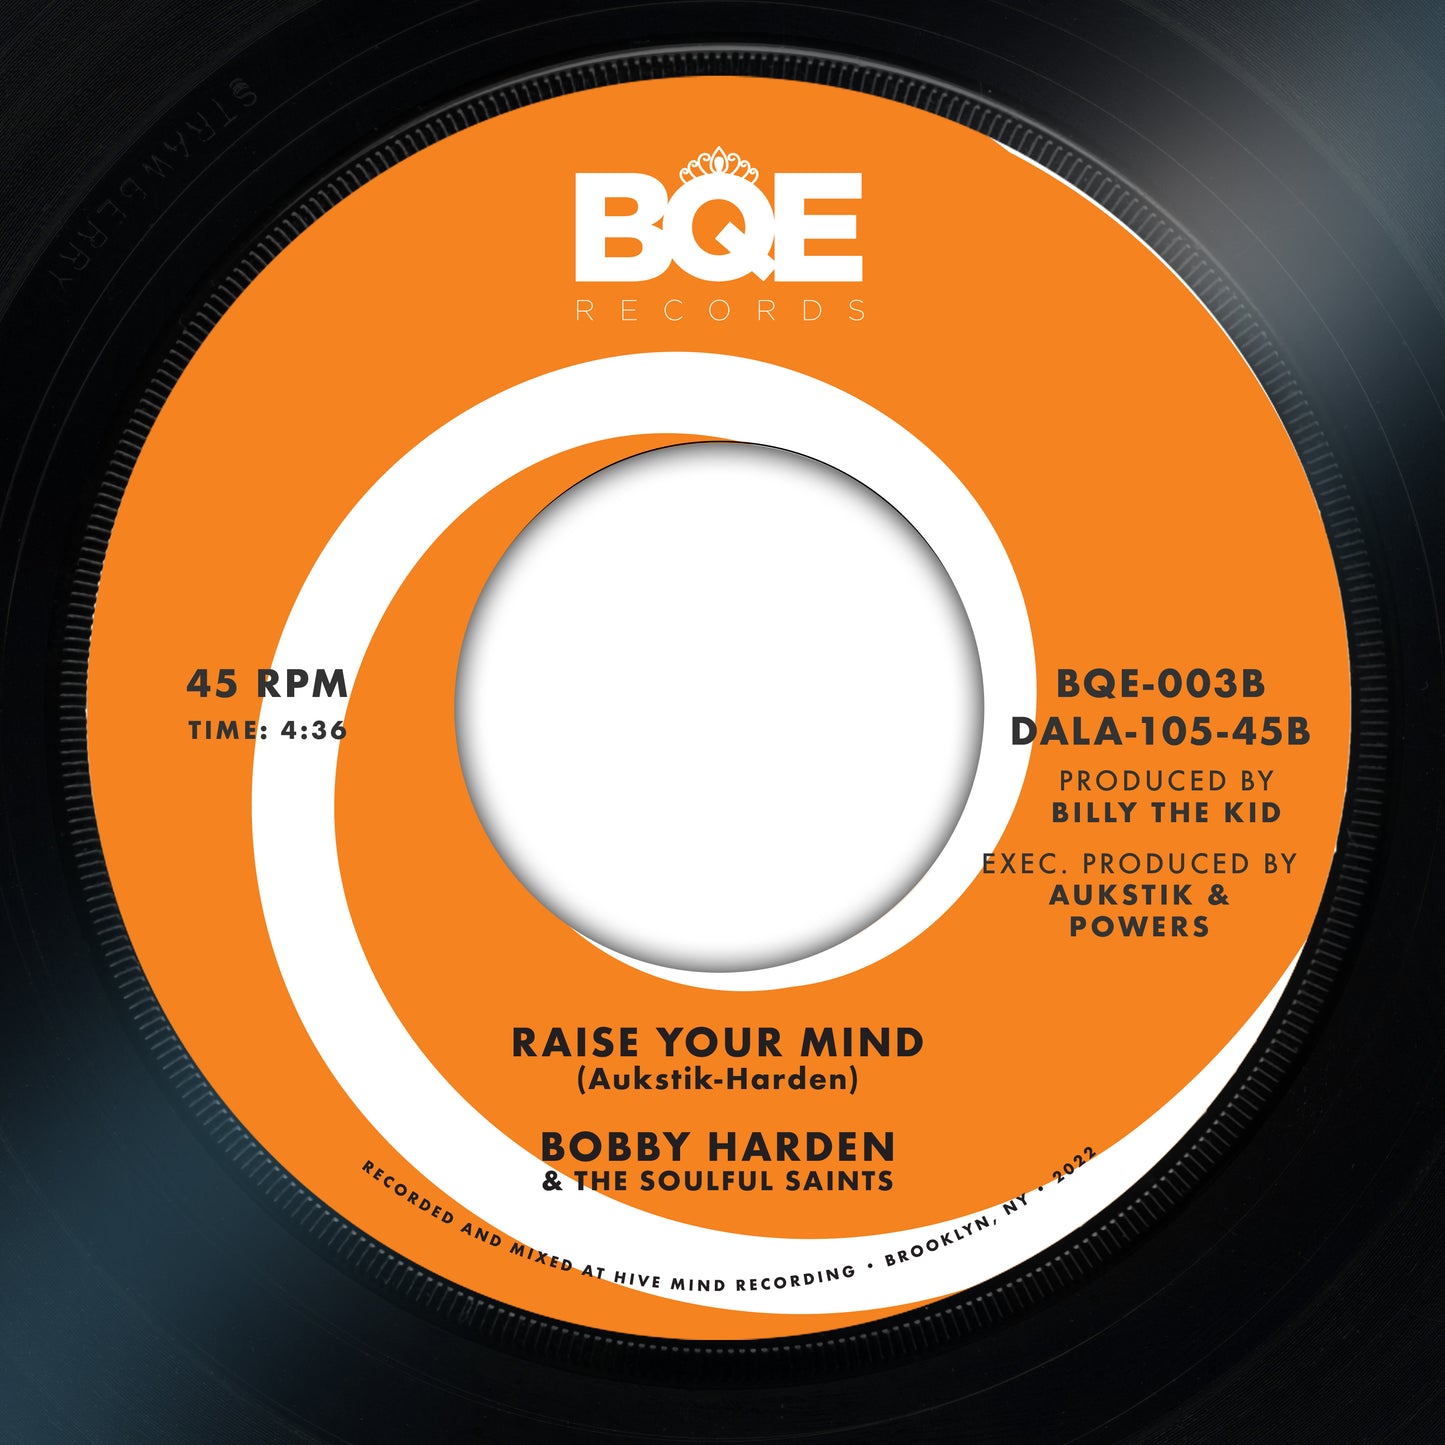 Bobby Harden & The Soulful Saints "One Night of the Week / Raise Your Mind" 45